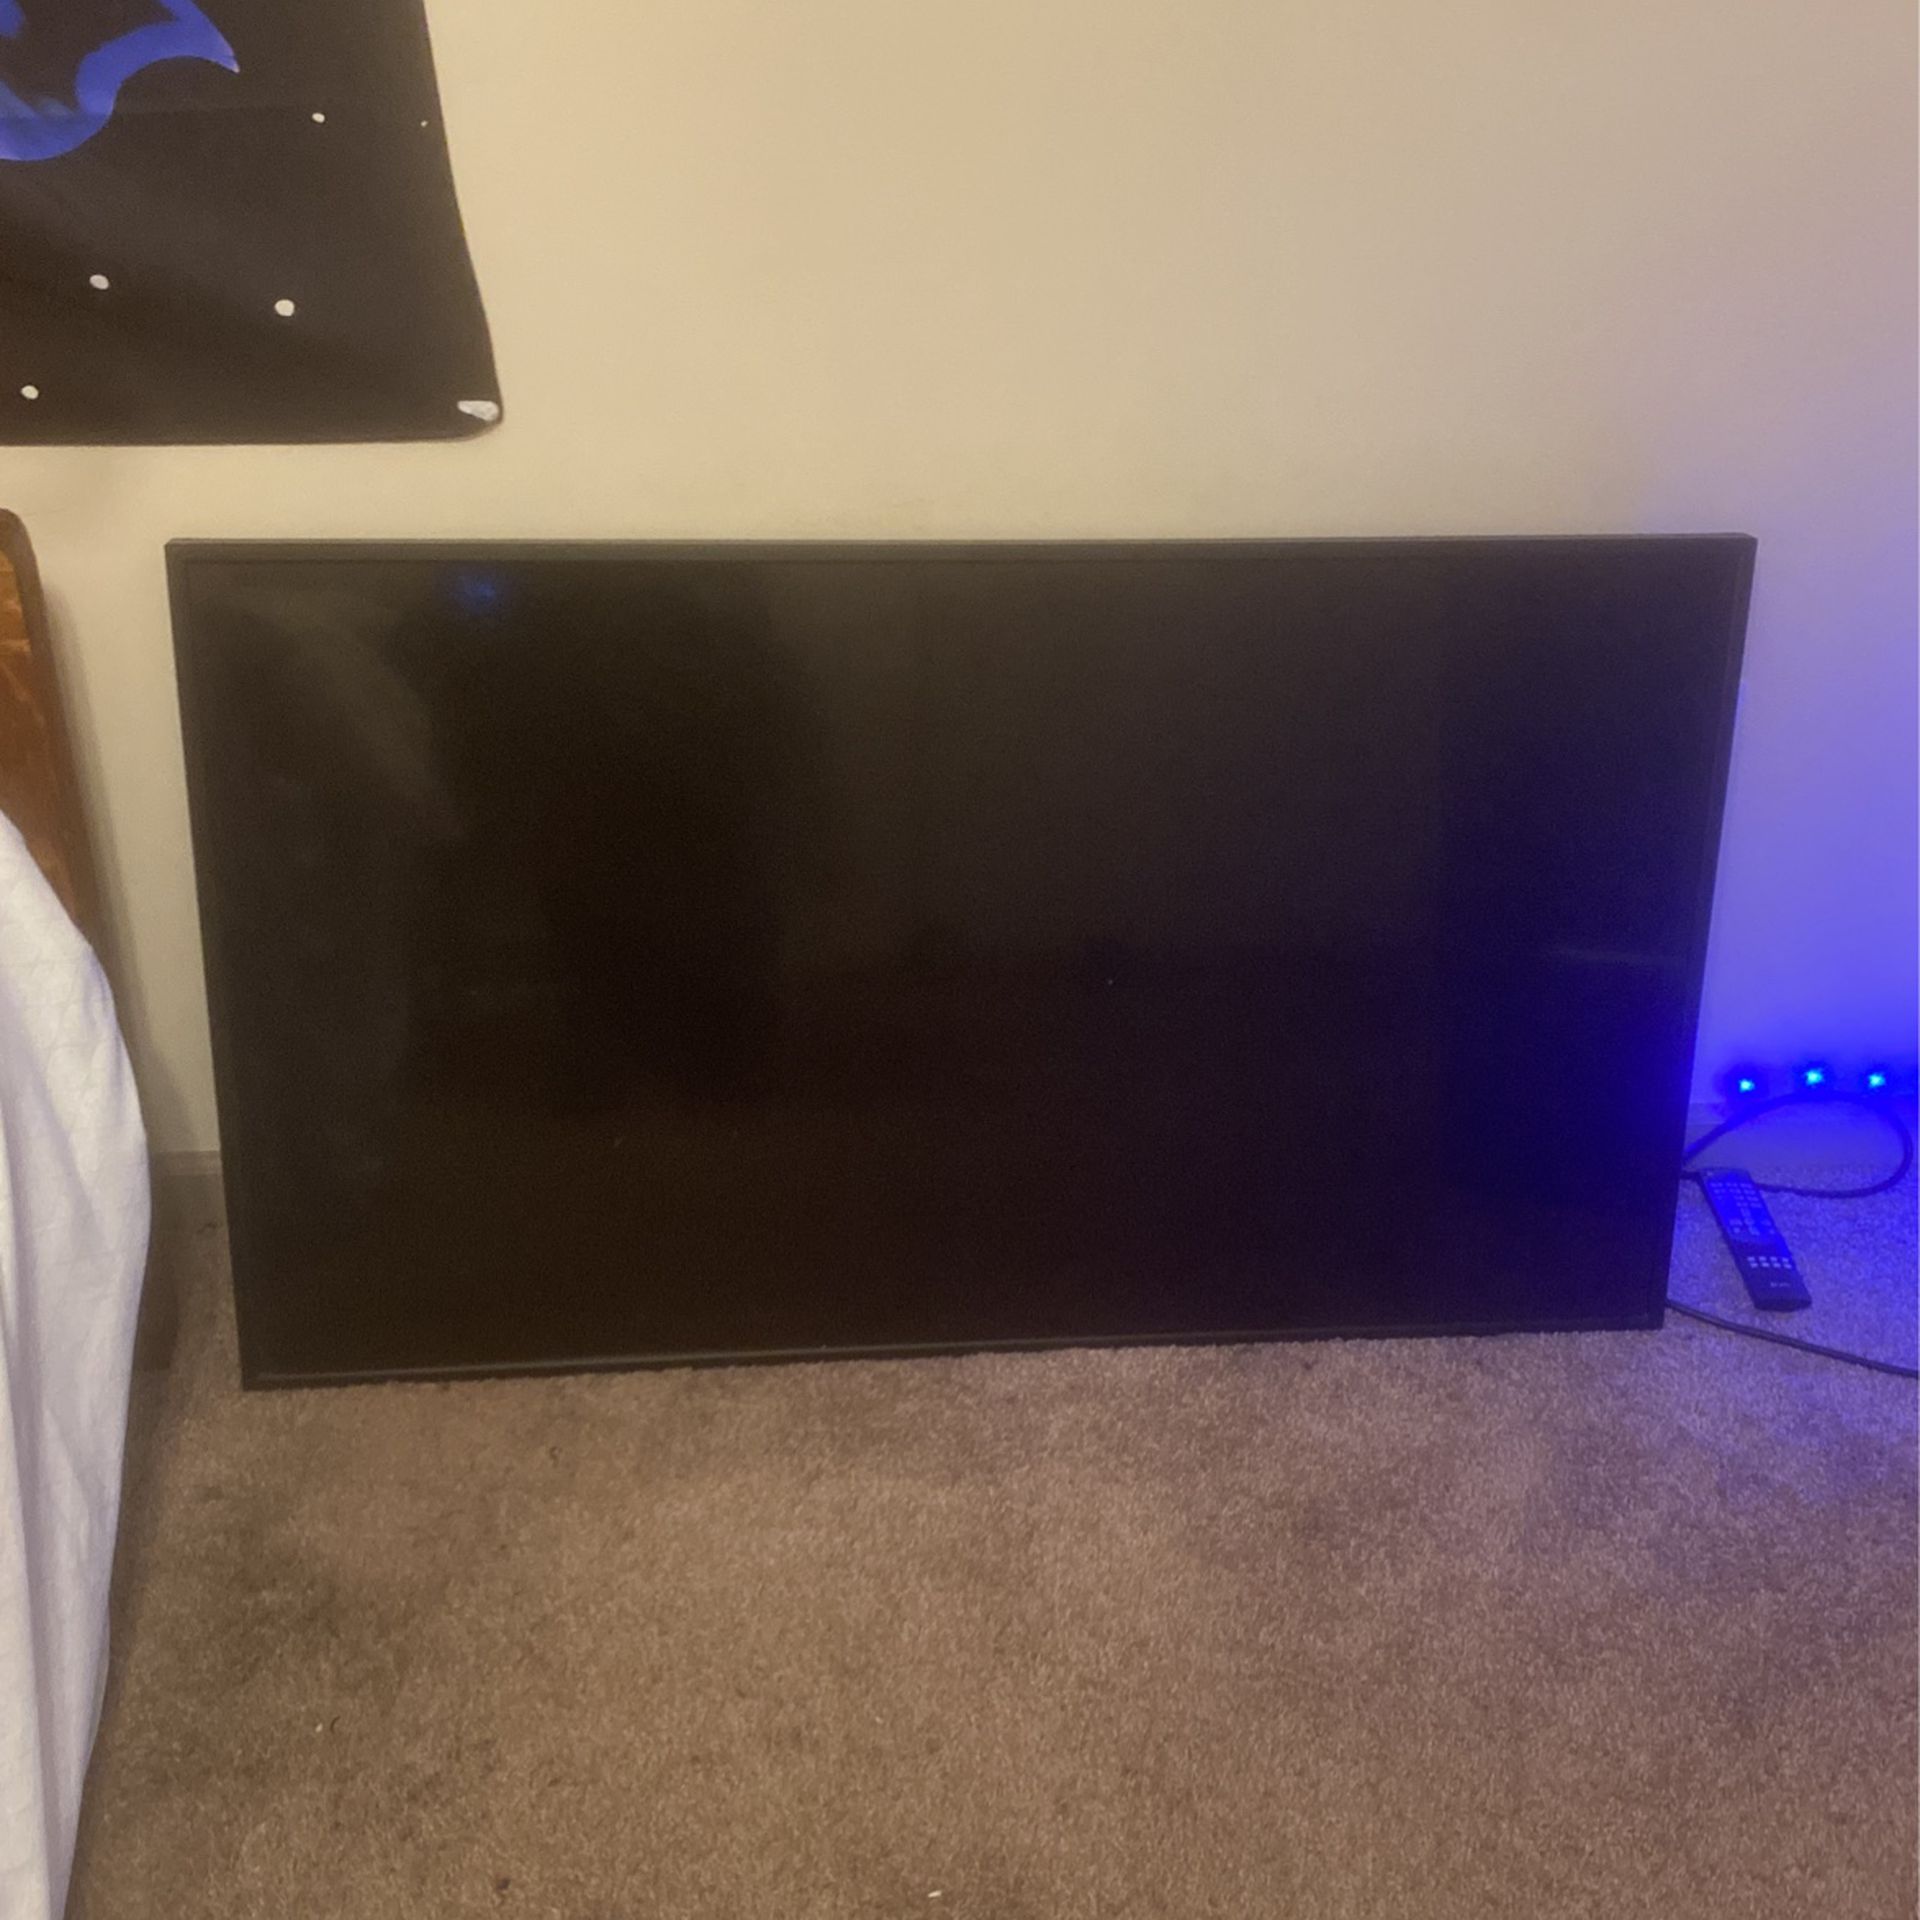 Poly Tv For Sale!